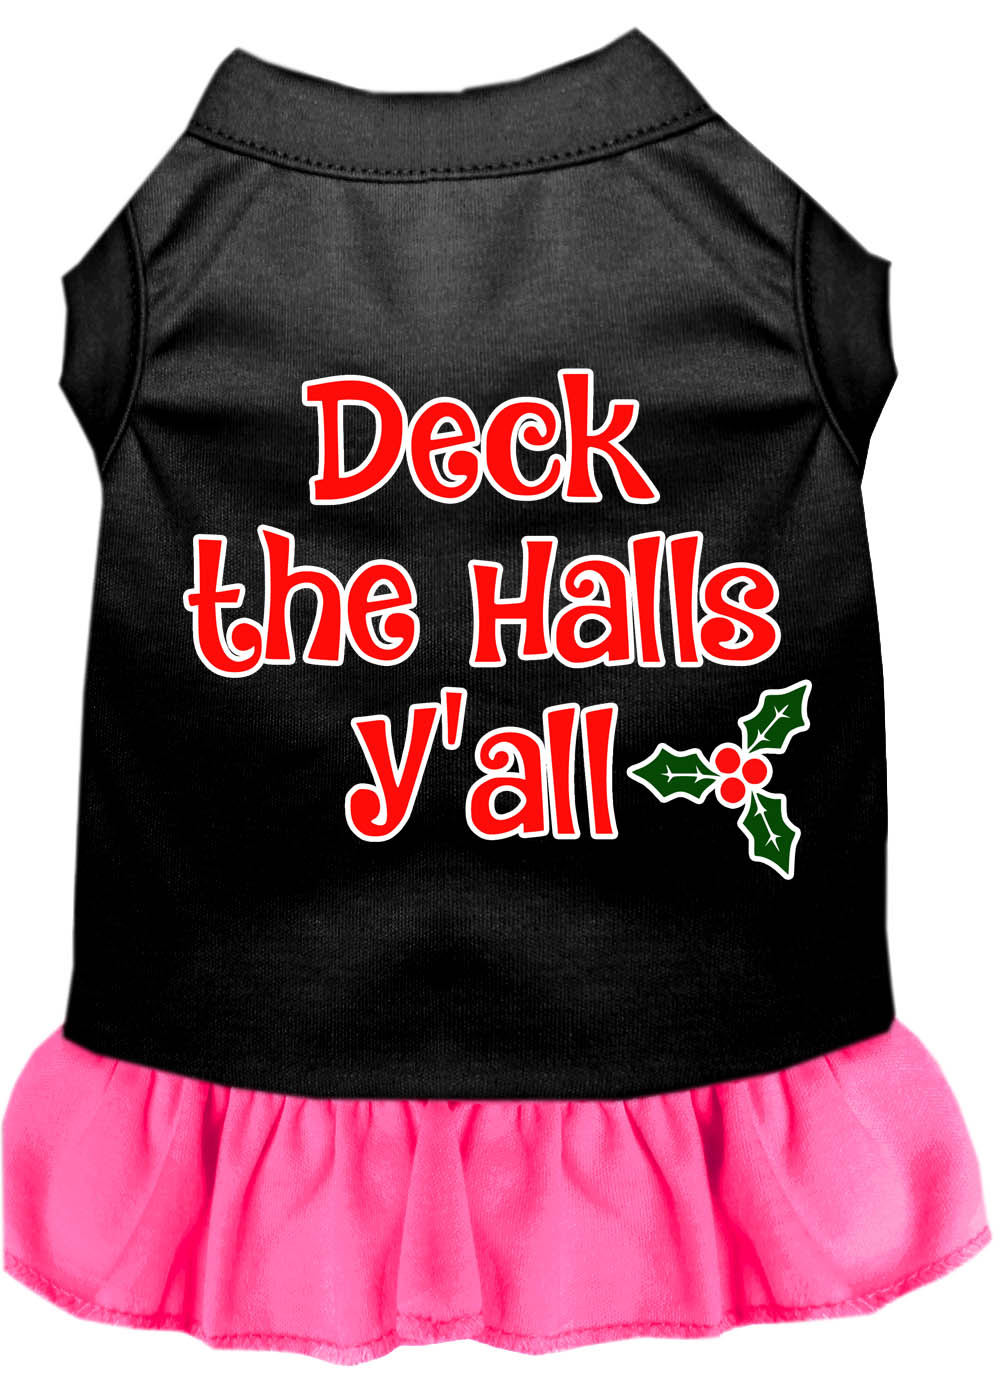 Deck the Halls Y'all Screen Print Dog Dress Black with Bright Pink Med